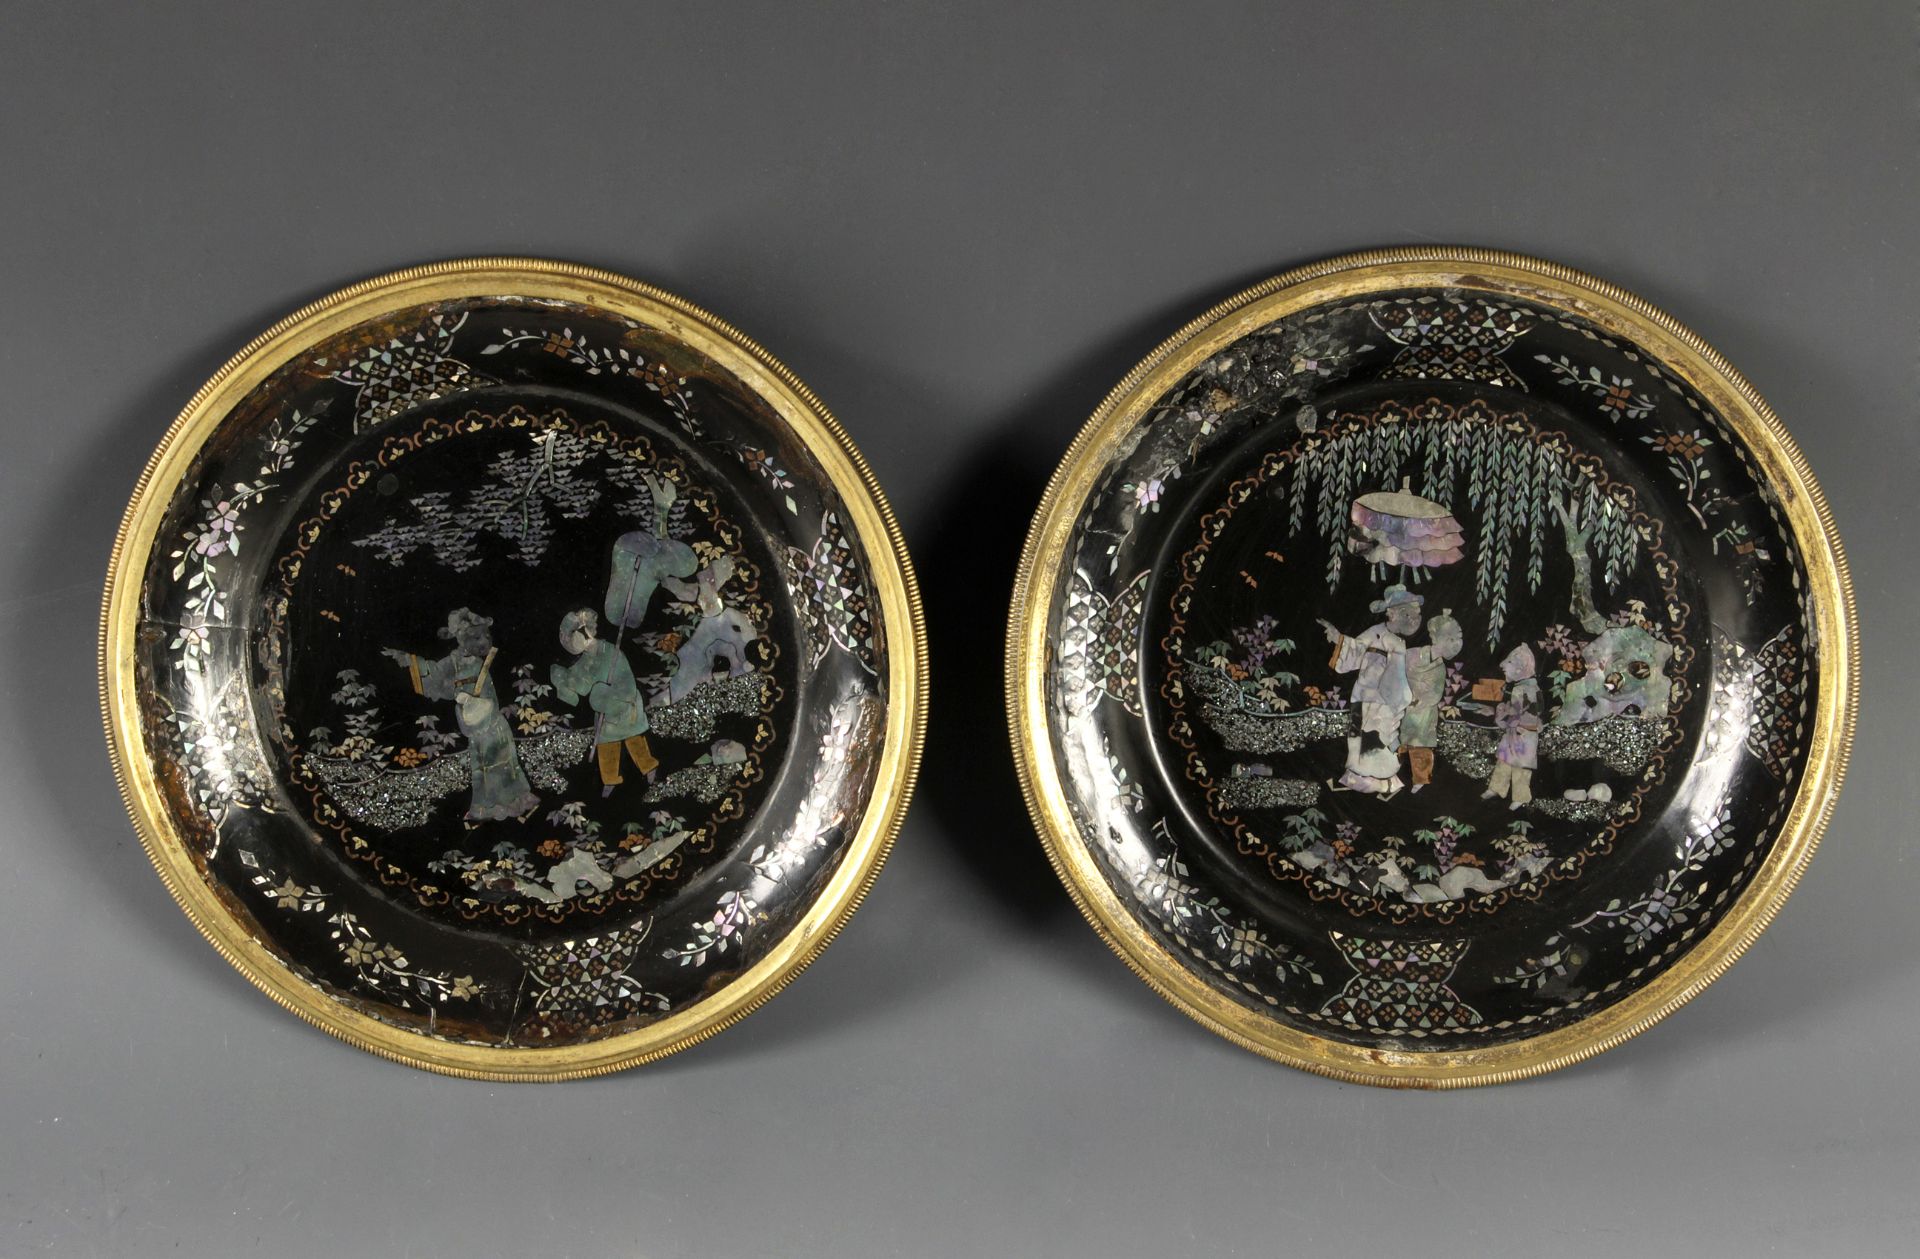 Pair of 18th century Chinese plates in lacquer with embossed mother of pearl